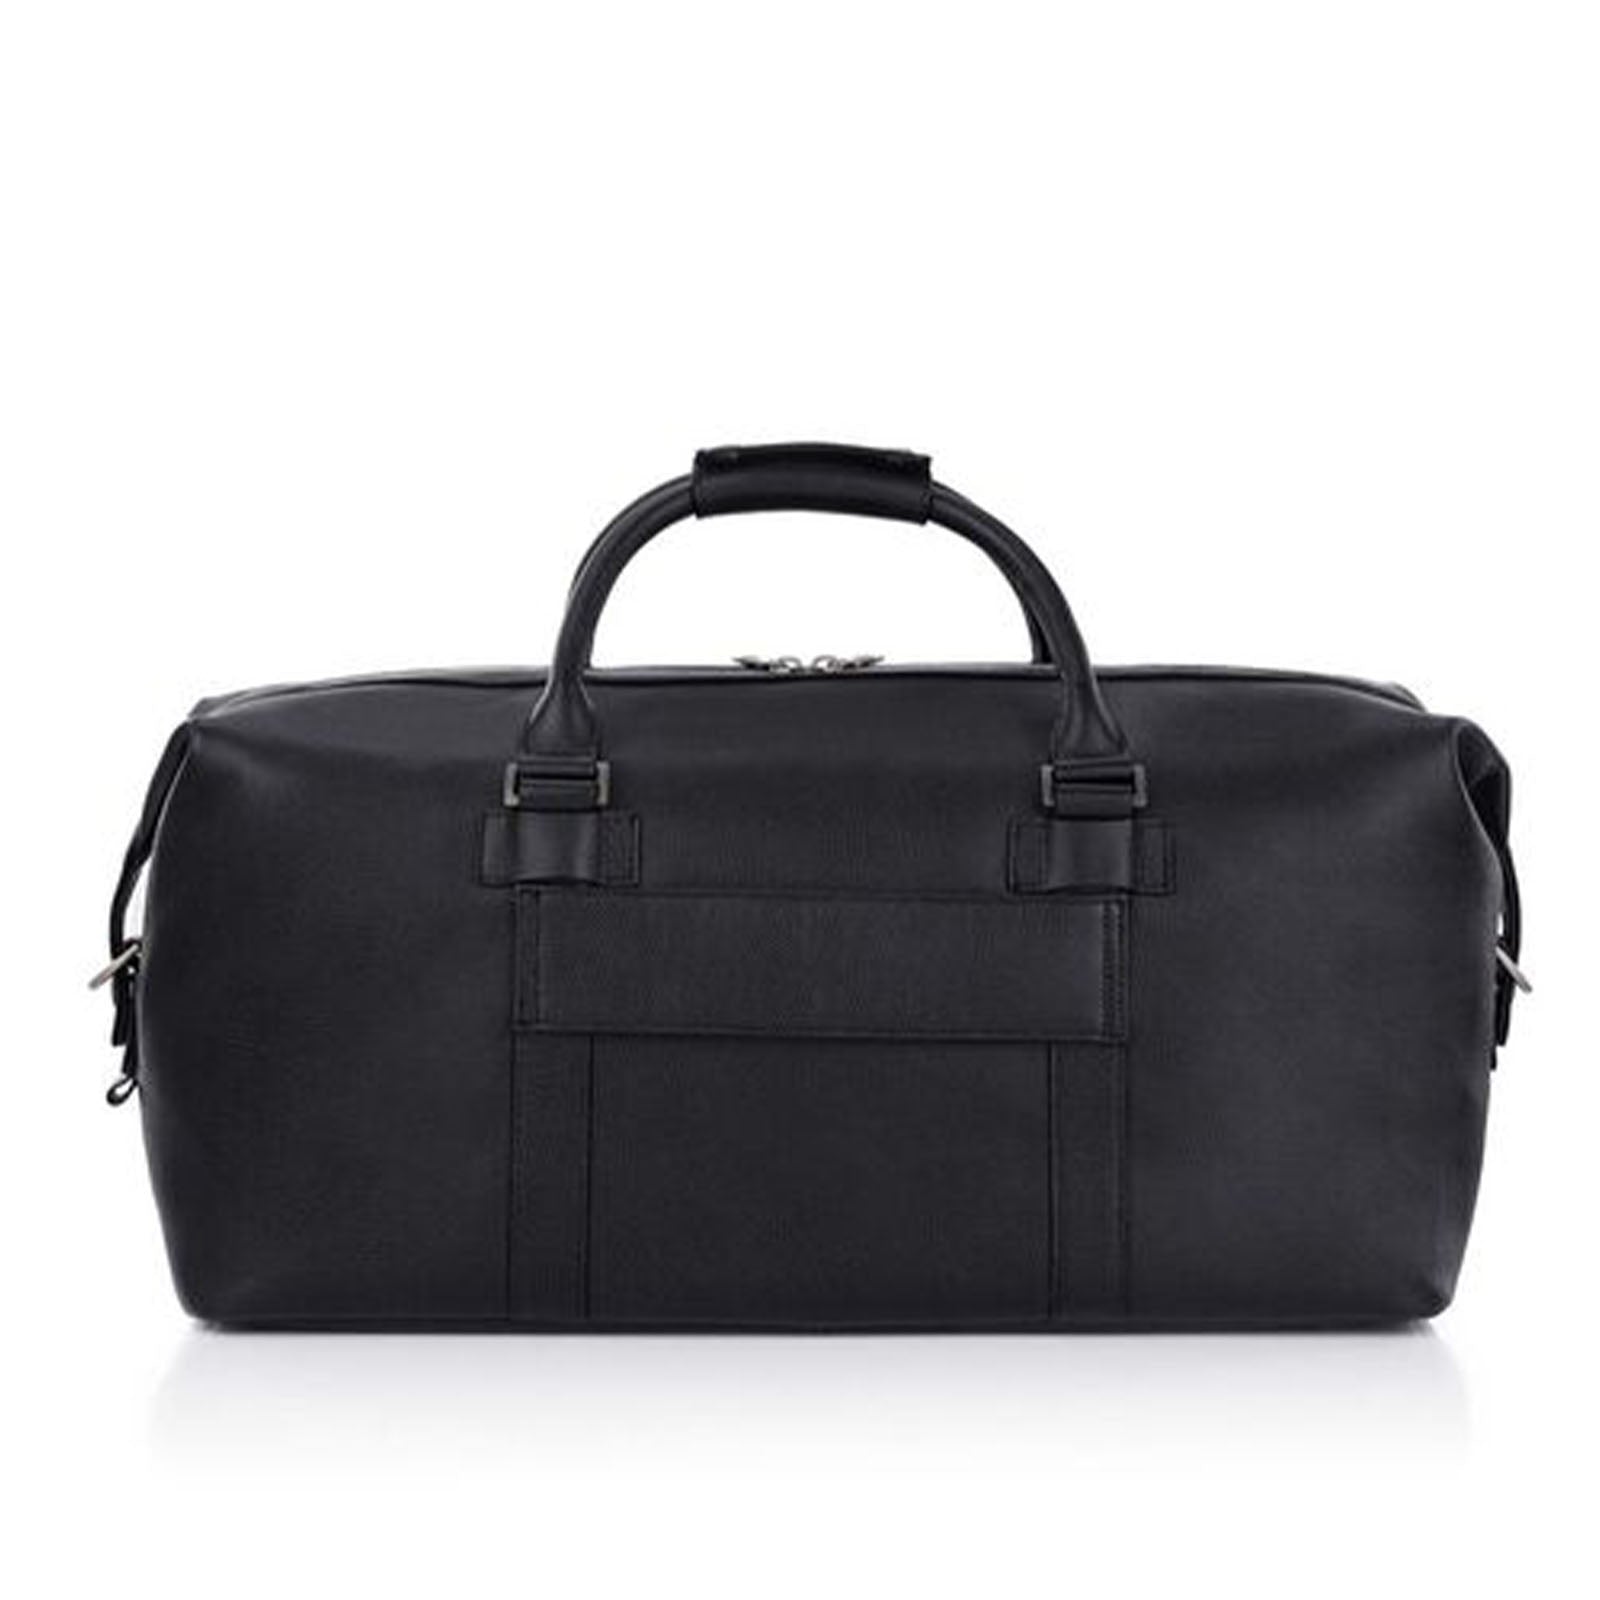 Samsonite-Classic-Leather-Carry-On-Duffle-Black-Back